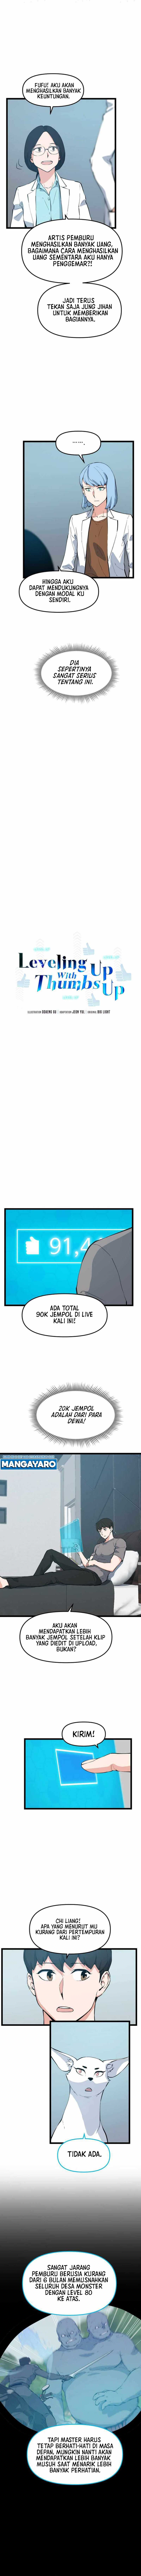 Leveling Up With Likes Chapter 51